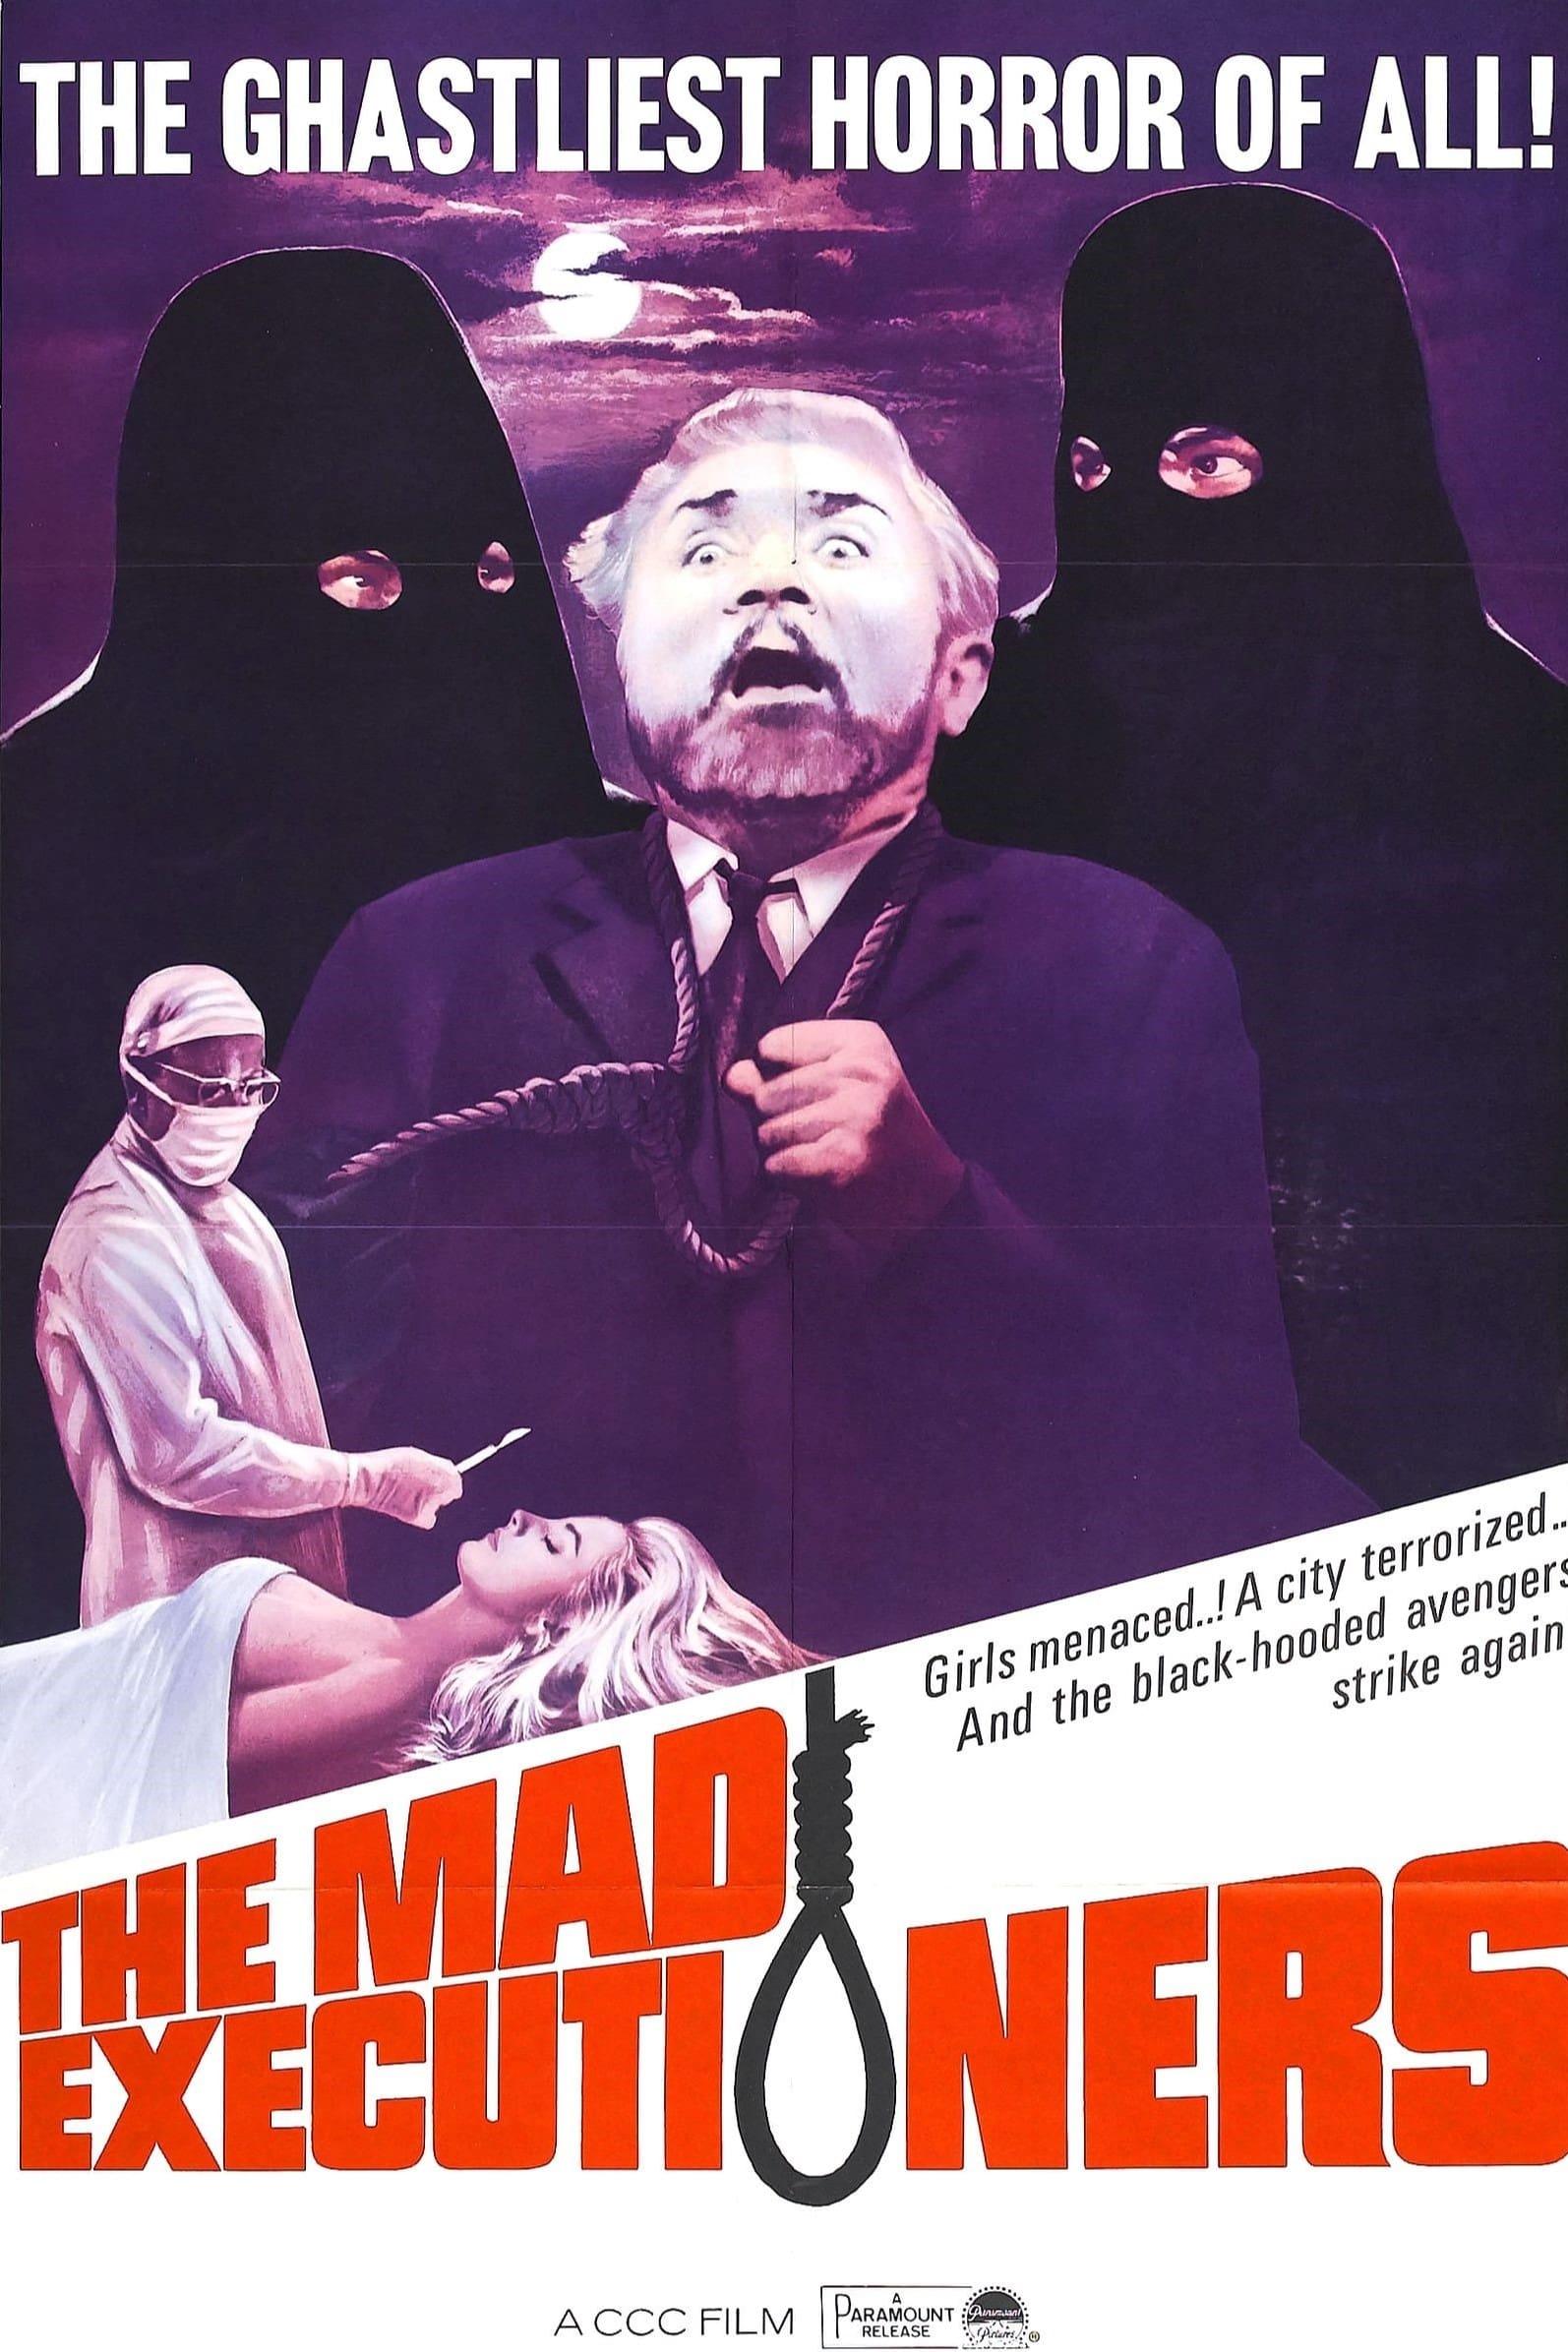 The Mad Executioners poster